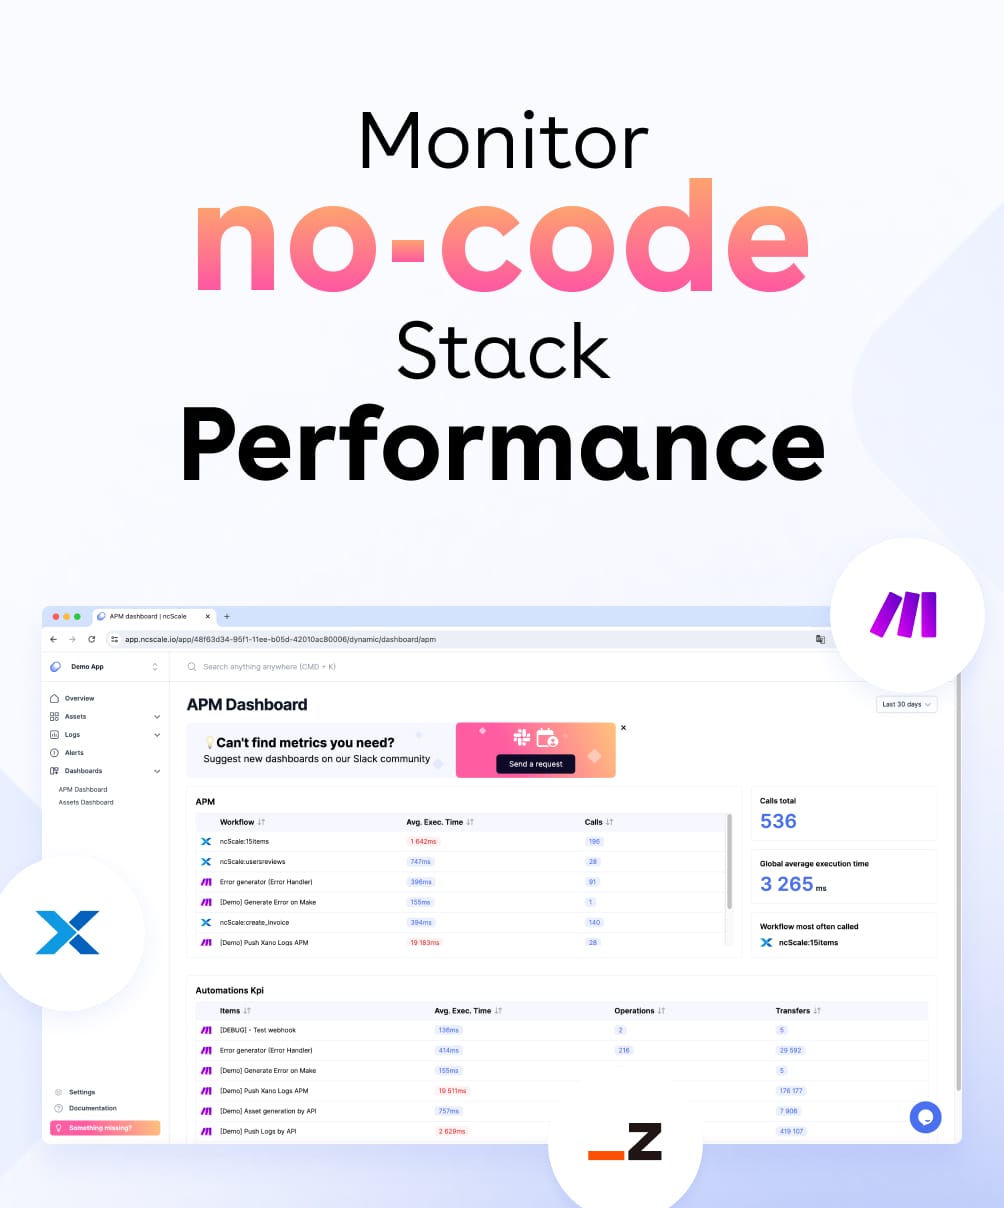 ncScale is rolling out the first-ever Application Performance Monitoring (APM) for no-code stack! (Make, Xano and more)